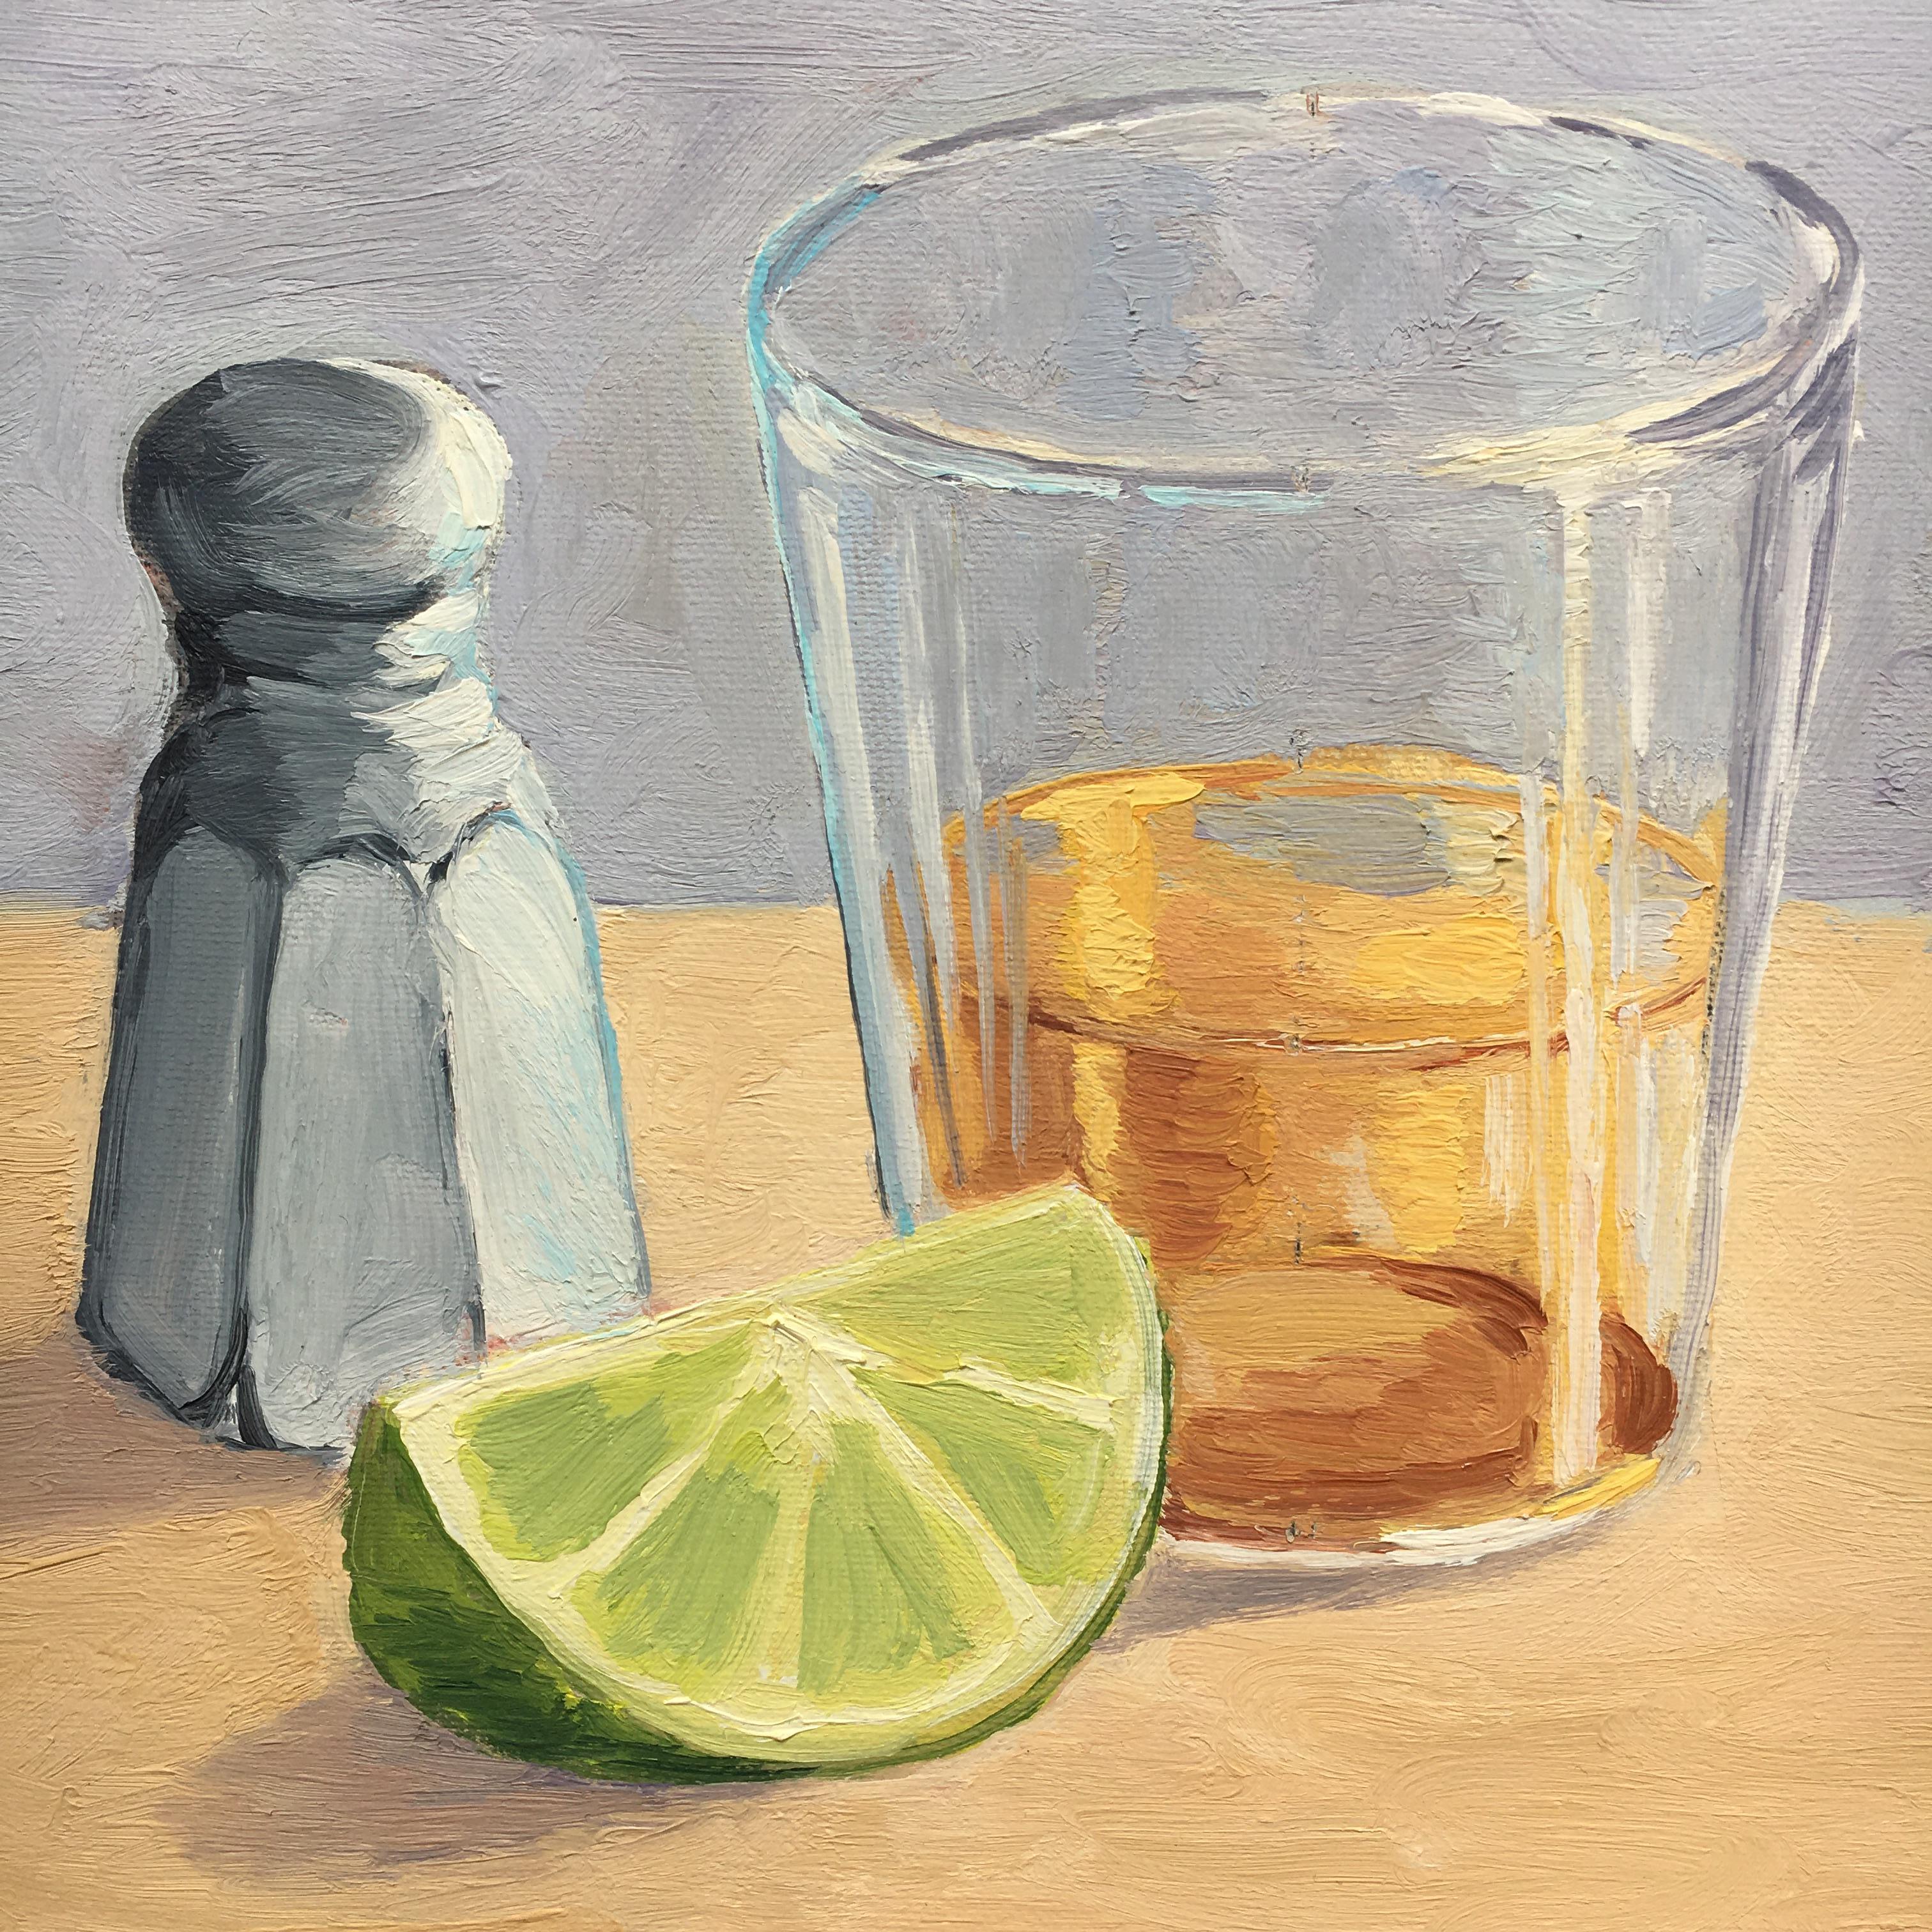 Still-Life of Shot Glass, Salt and Lime. Title - A Lick, A Shot, A Lime - Painting by Carl Scorza